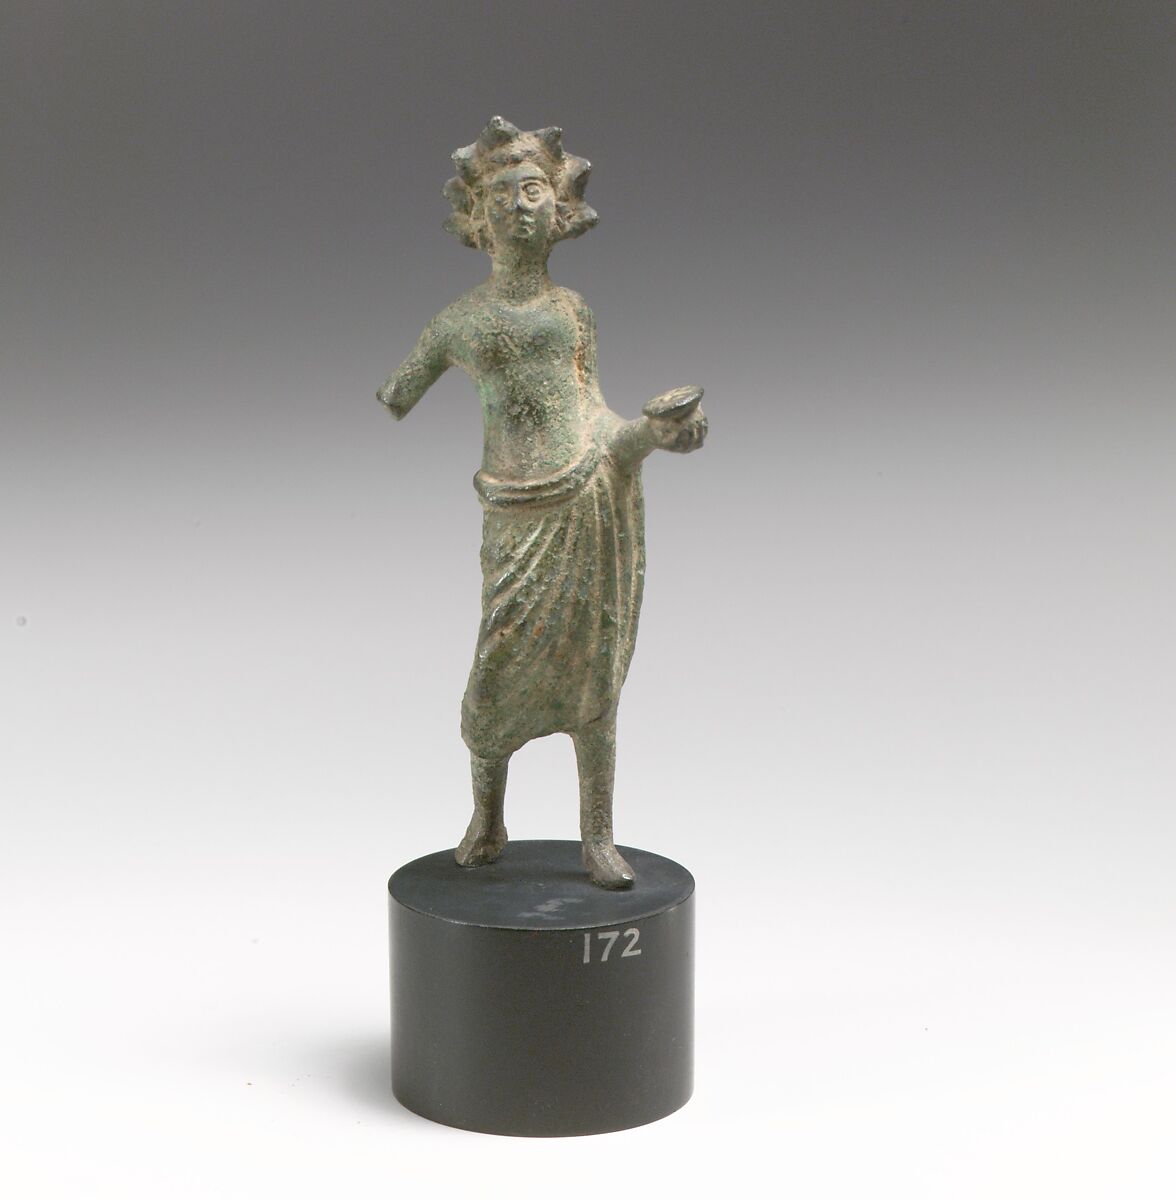 Bronze statuette of a priest or offrant, Bronze, Etruscan 